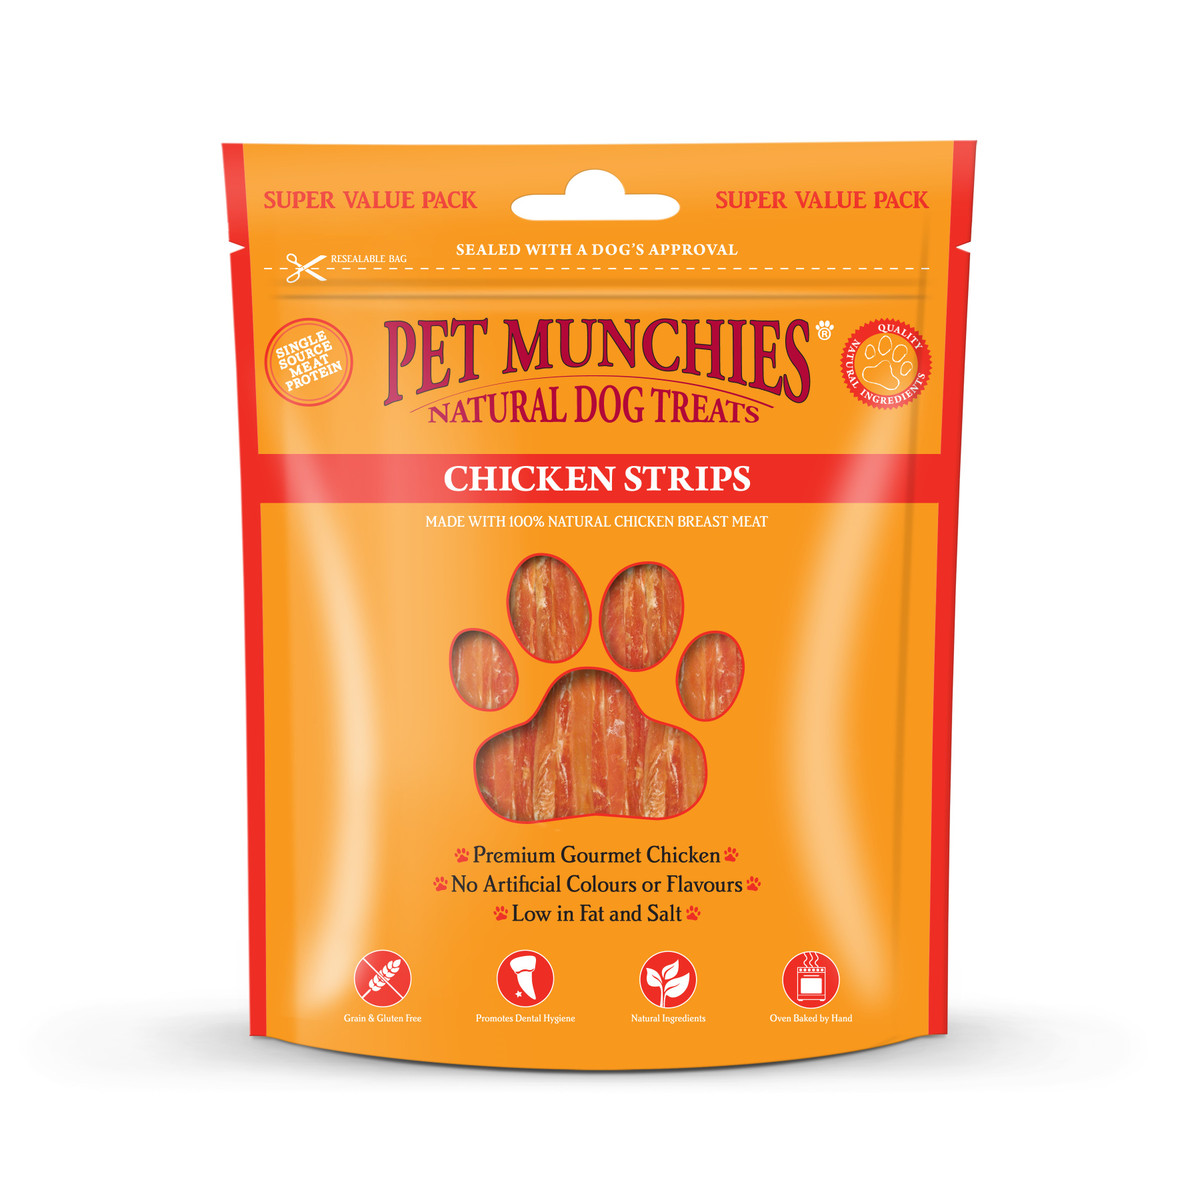 Pet Munchies Chicken Strips Super Value Pack Natural Dog Treats